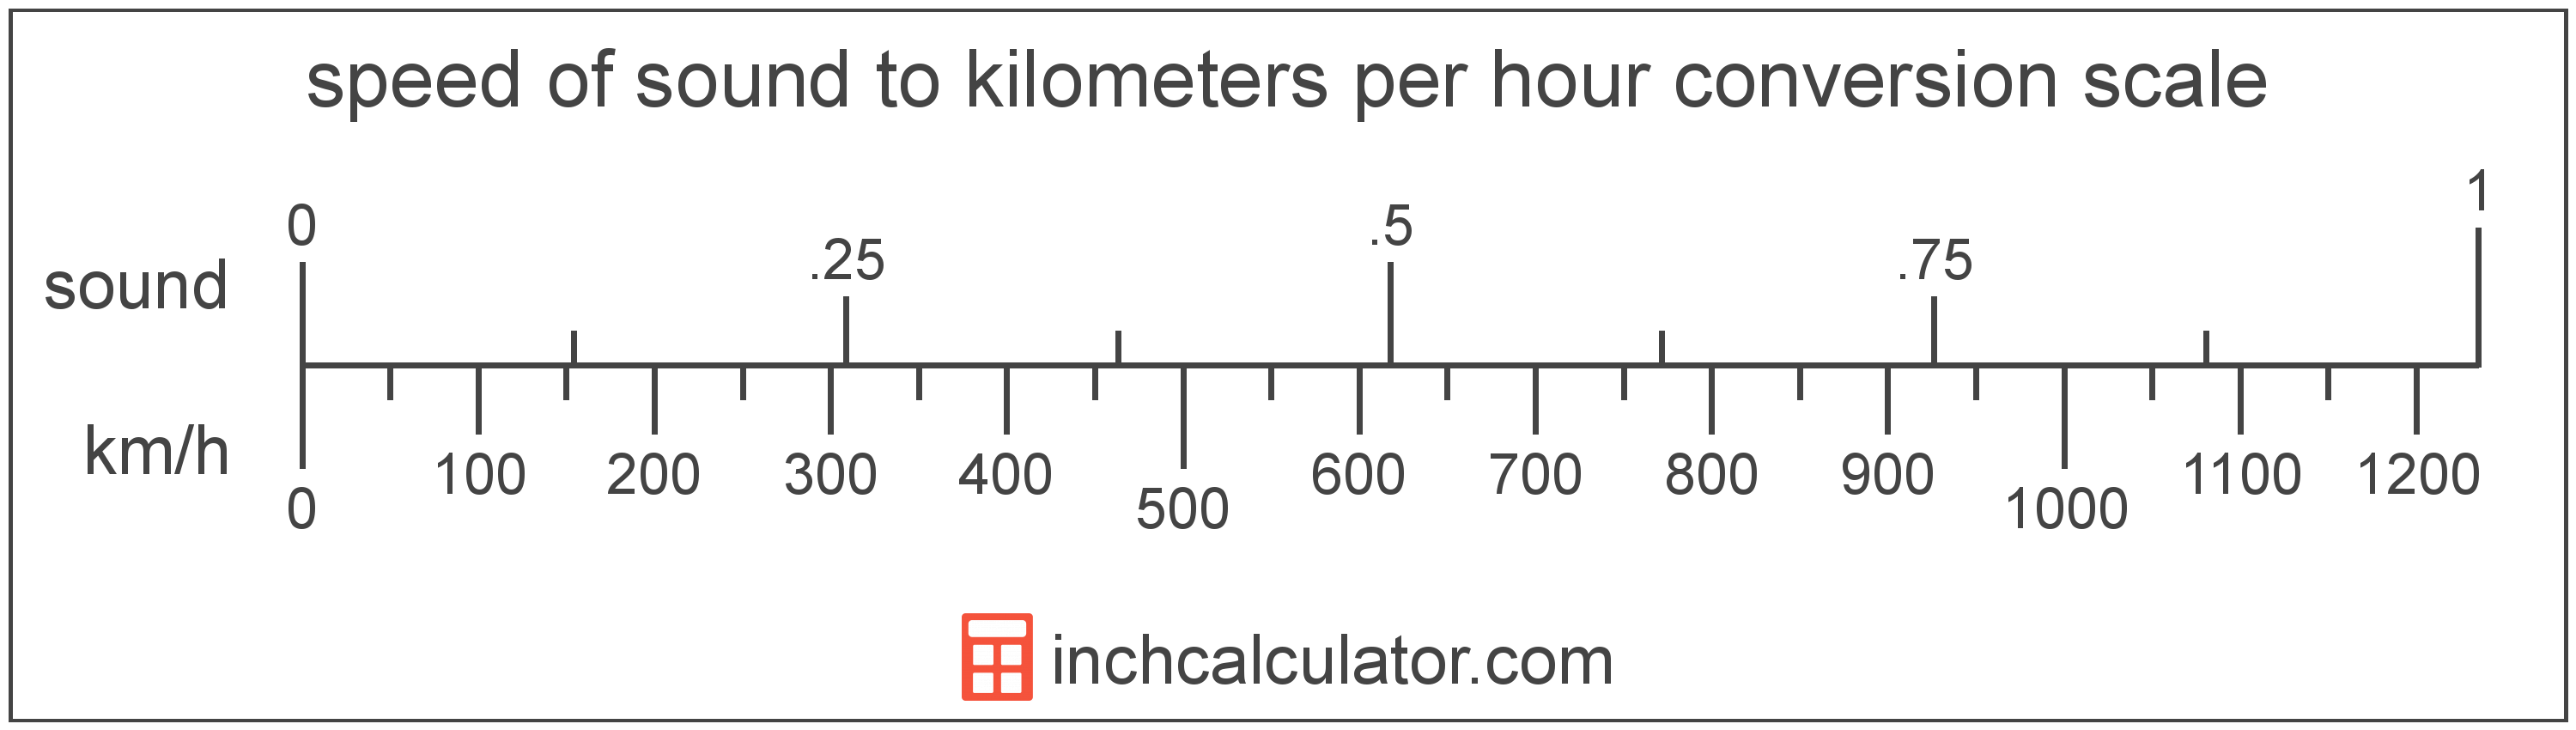 conversion scale showing speed of sound and equivalent kilometers per hour speed values